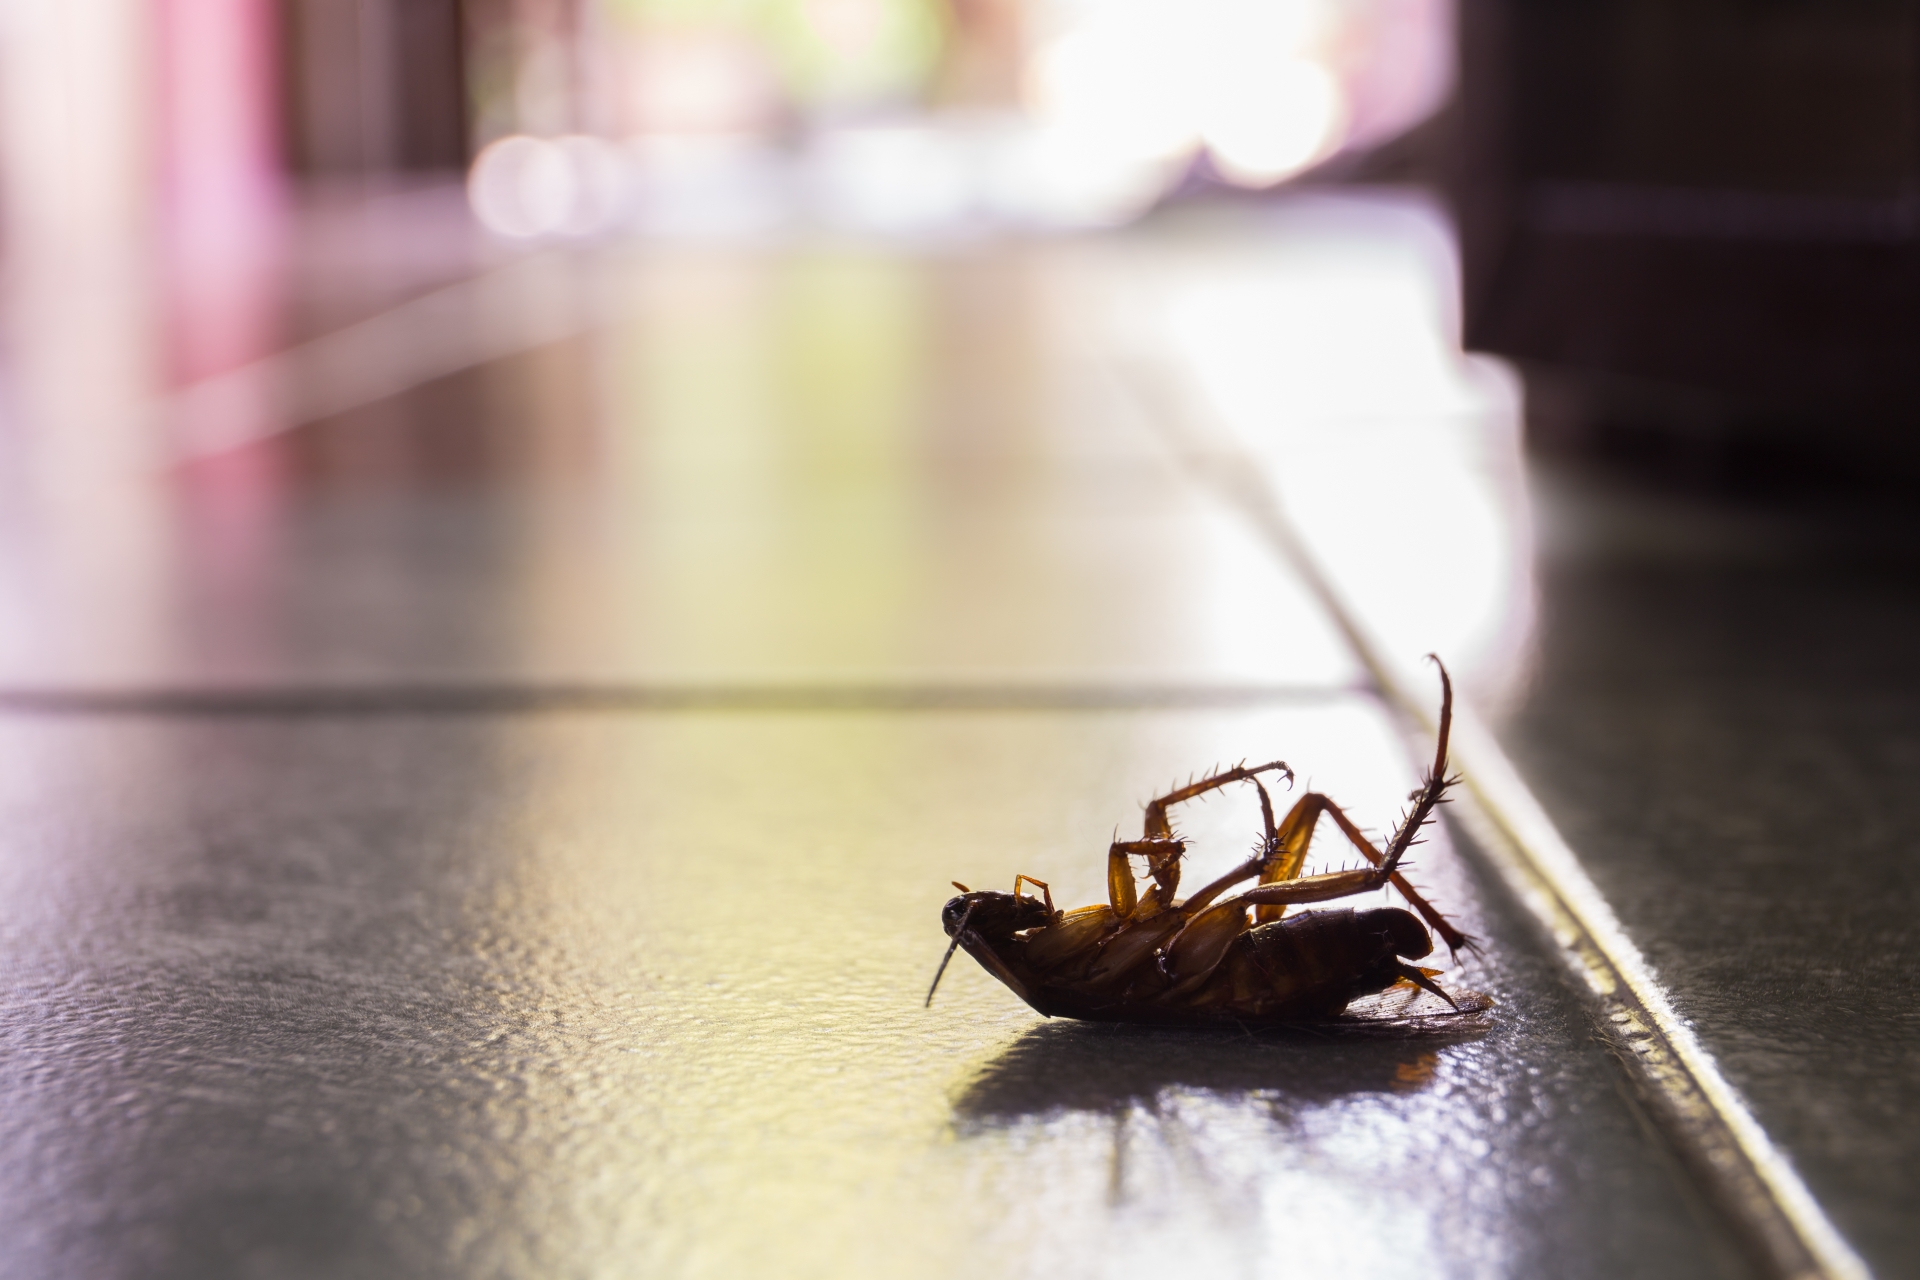 Cockroach Control, Pest Control in West Wickham, BR4. Call Now 020 8166 9746